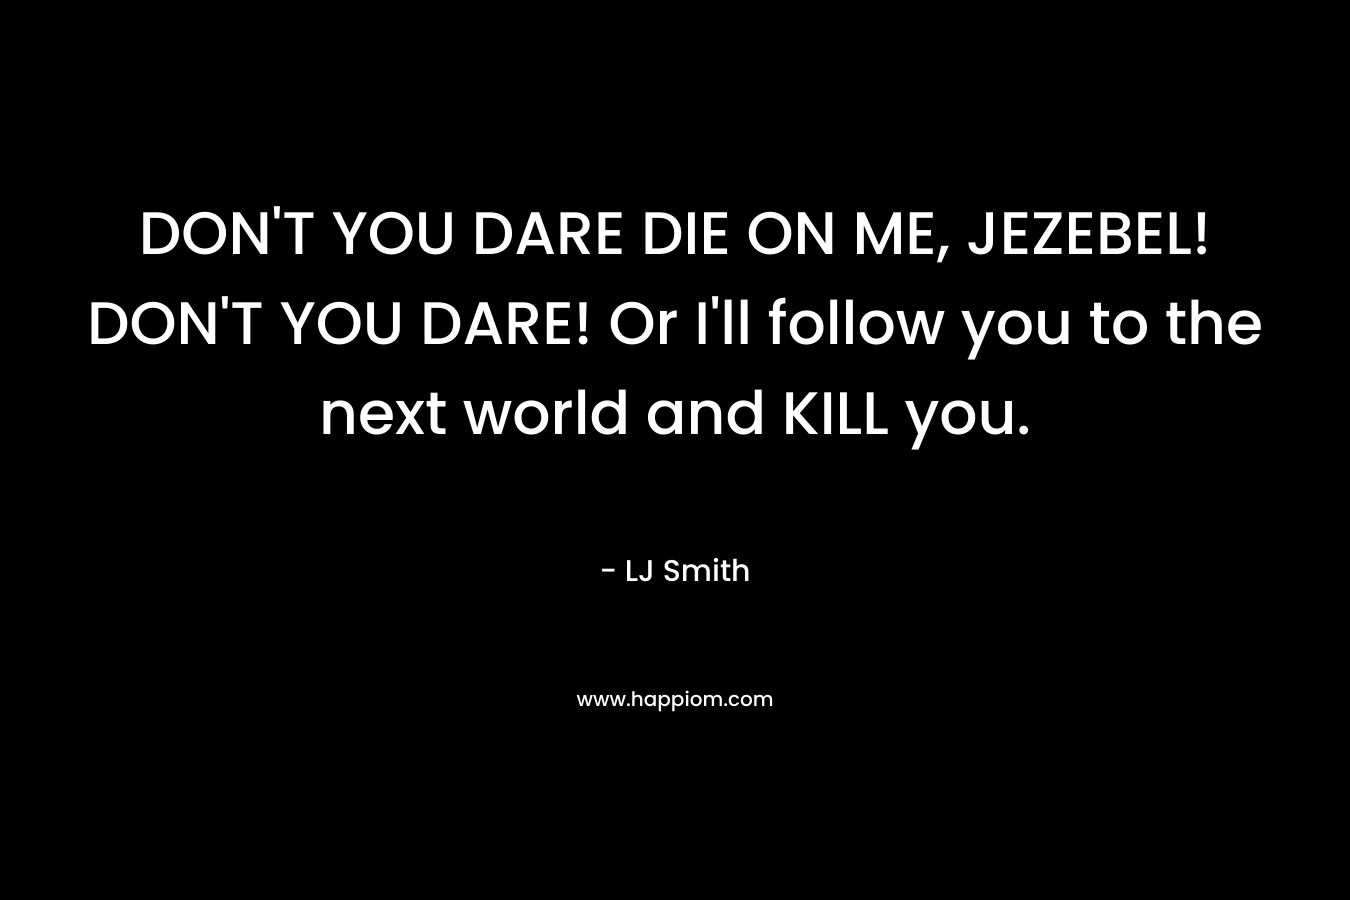 DON’T YOU DARE DIE ON ME, JEZEBEL! DON’T YOU DARE! Or I’ll follow you to the next world and KILL you. – LJ Smith